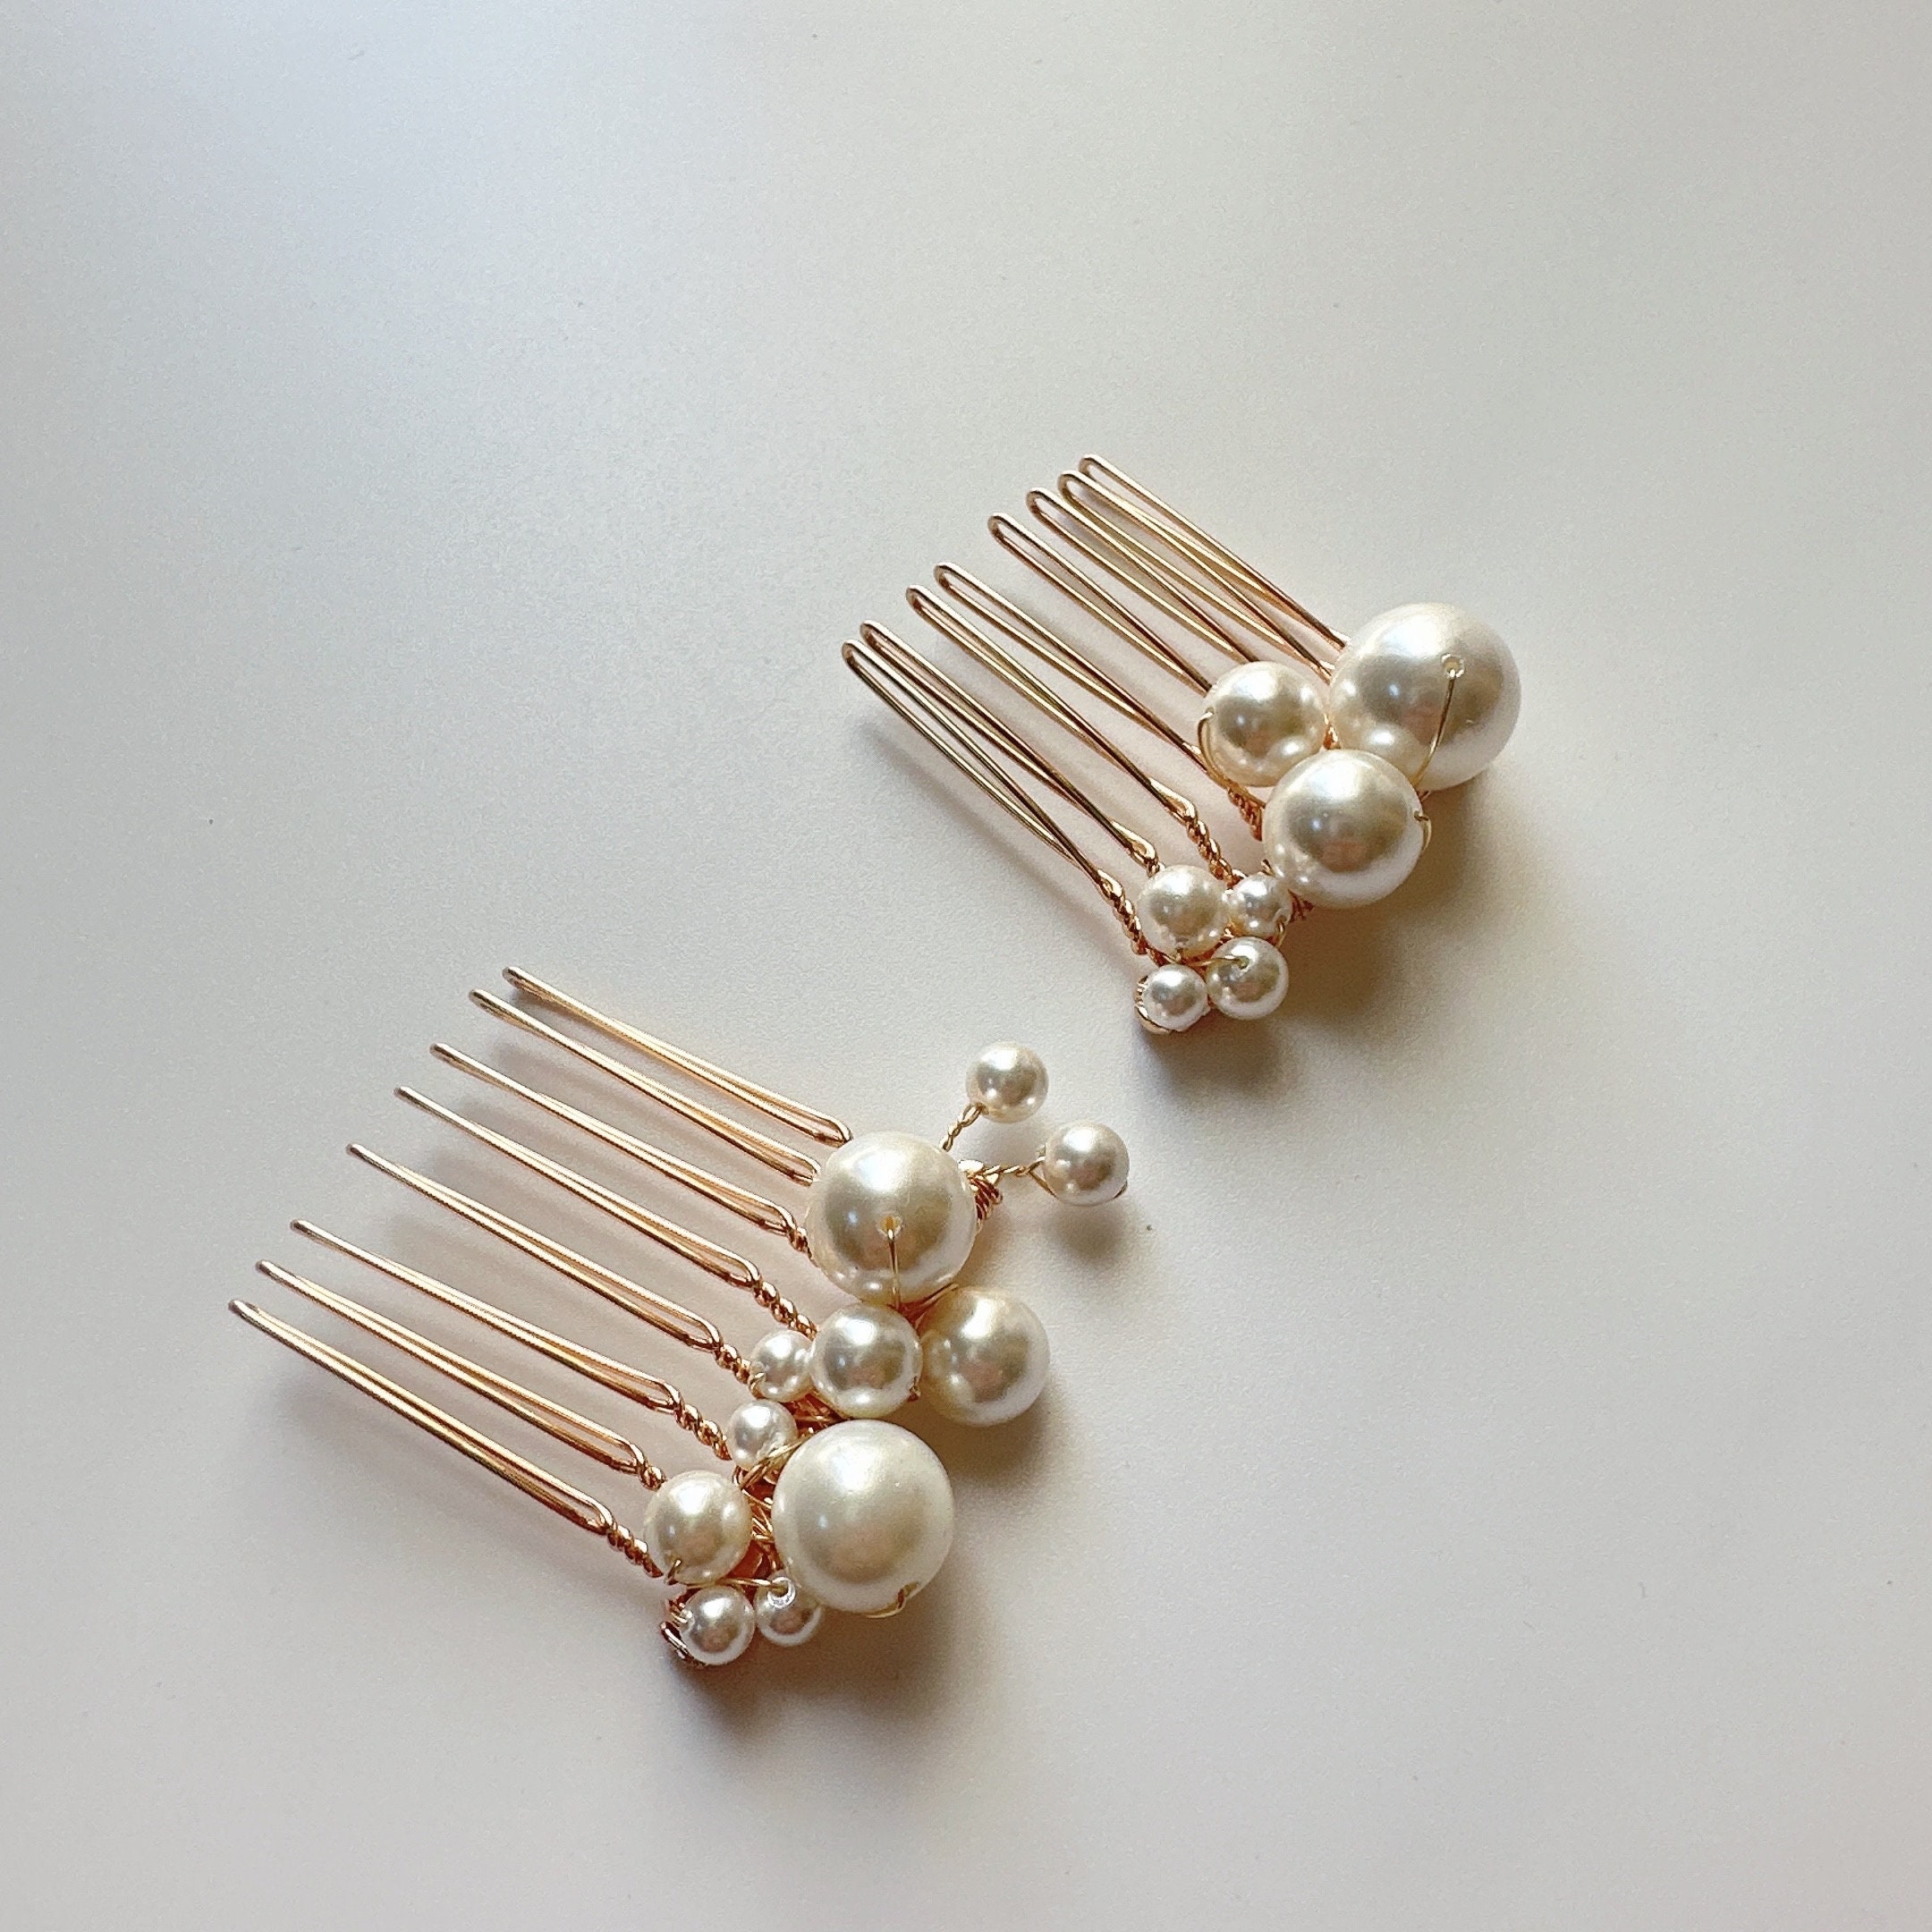 Luxshiny Pearls for Hair 12pcs Pearl Spiral Hair Pins, Gold Twists Hair  Coils Pearls Hair Clip Pearl Hair Accessories for Wedding Party Prom